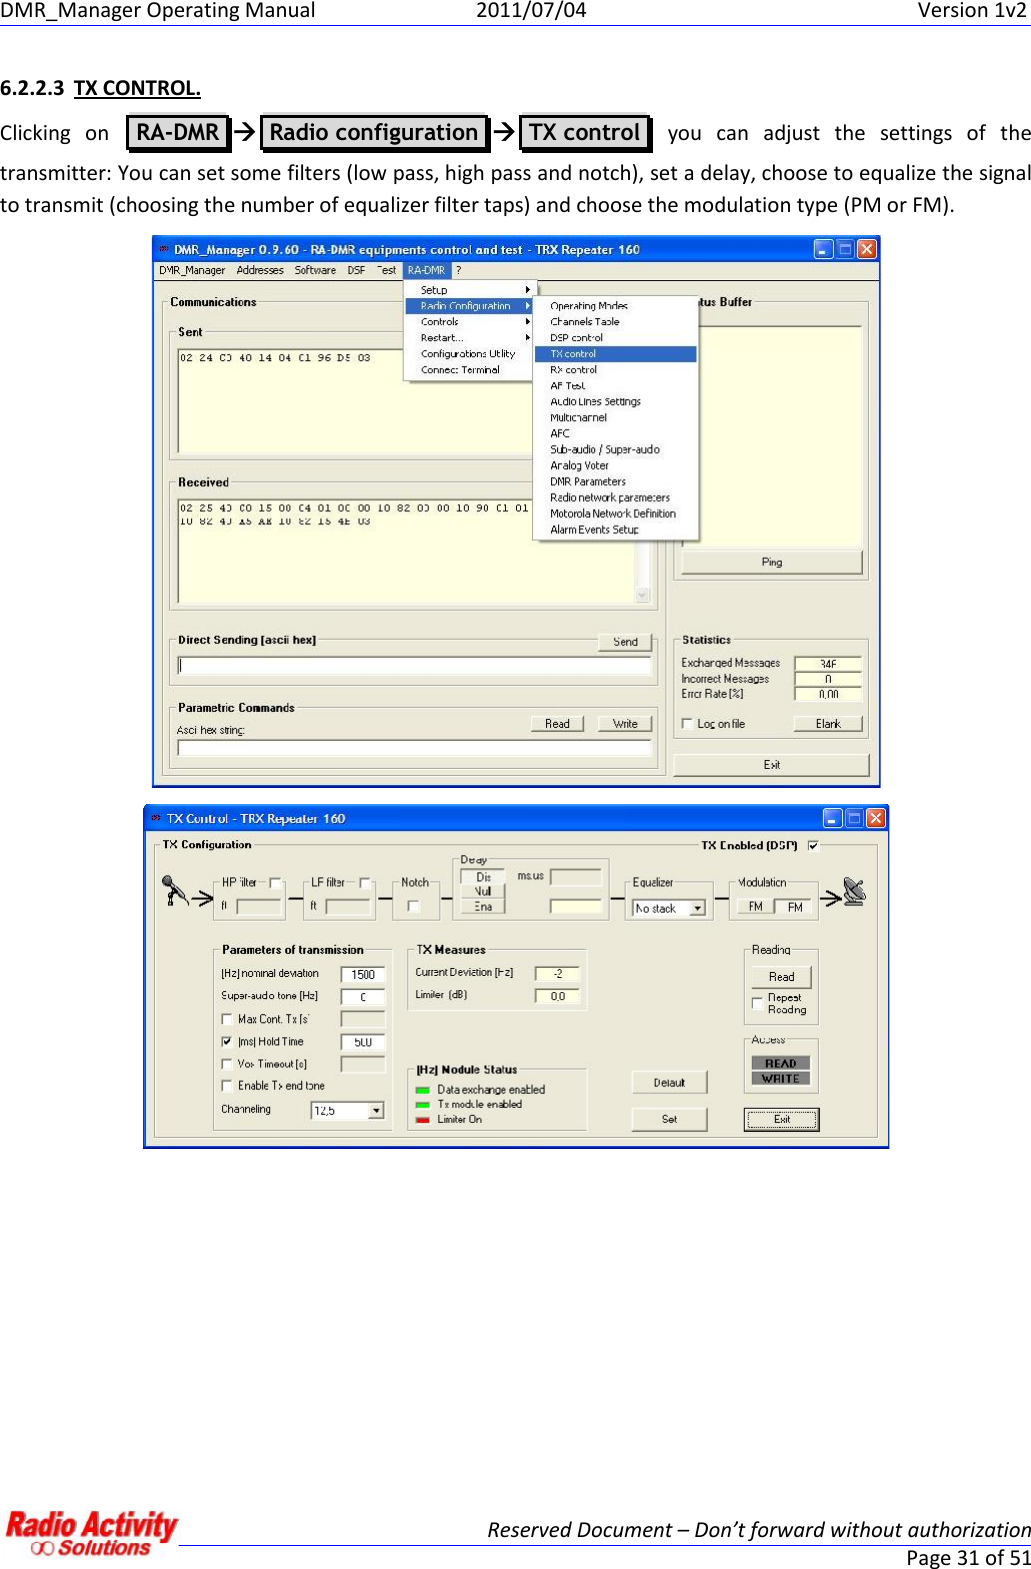 DMR_Manager Operating Manual 2011/07/04 Version 1v2Reserved Document – Don’t forward without authorizationPage 31 of 516.2.2.3 TX CONTROL.Clicking  on RA-DMR Radio configuration TX control you  can  adjust  the  settings  of  thetransmitter: You can set some filters (low pass, high pass and notch), set a delay, choose to equalize the signalto transmit (choosing the number of equalizer filter taps) and choose the modulation type (PM or FM).